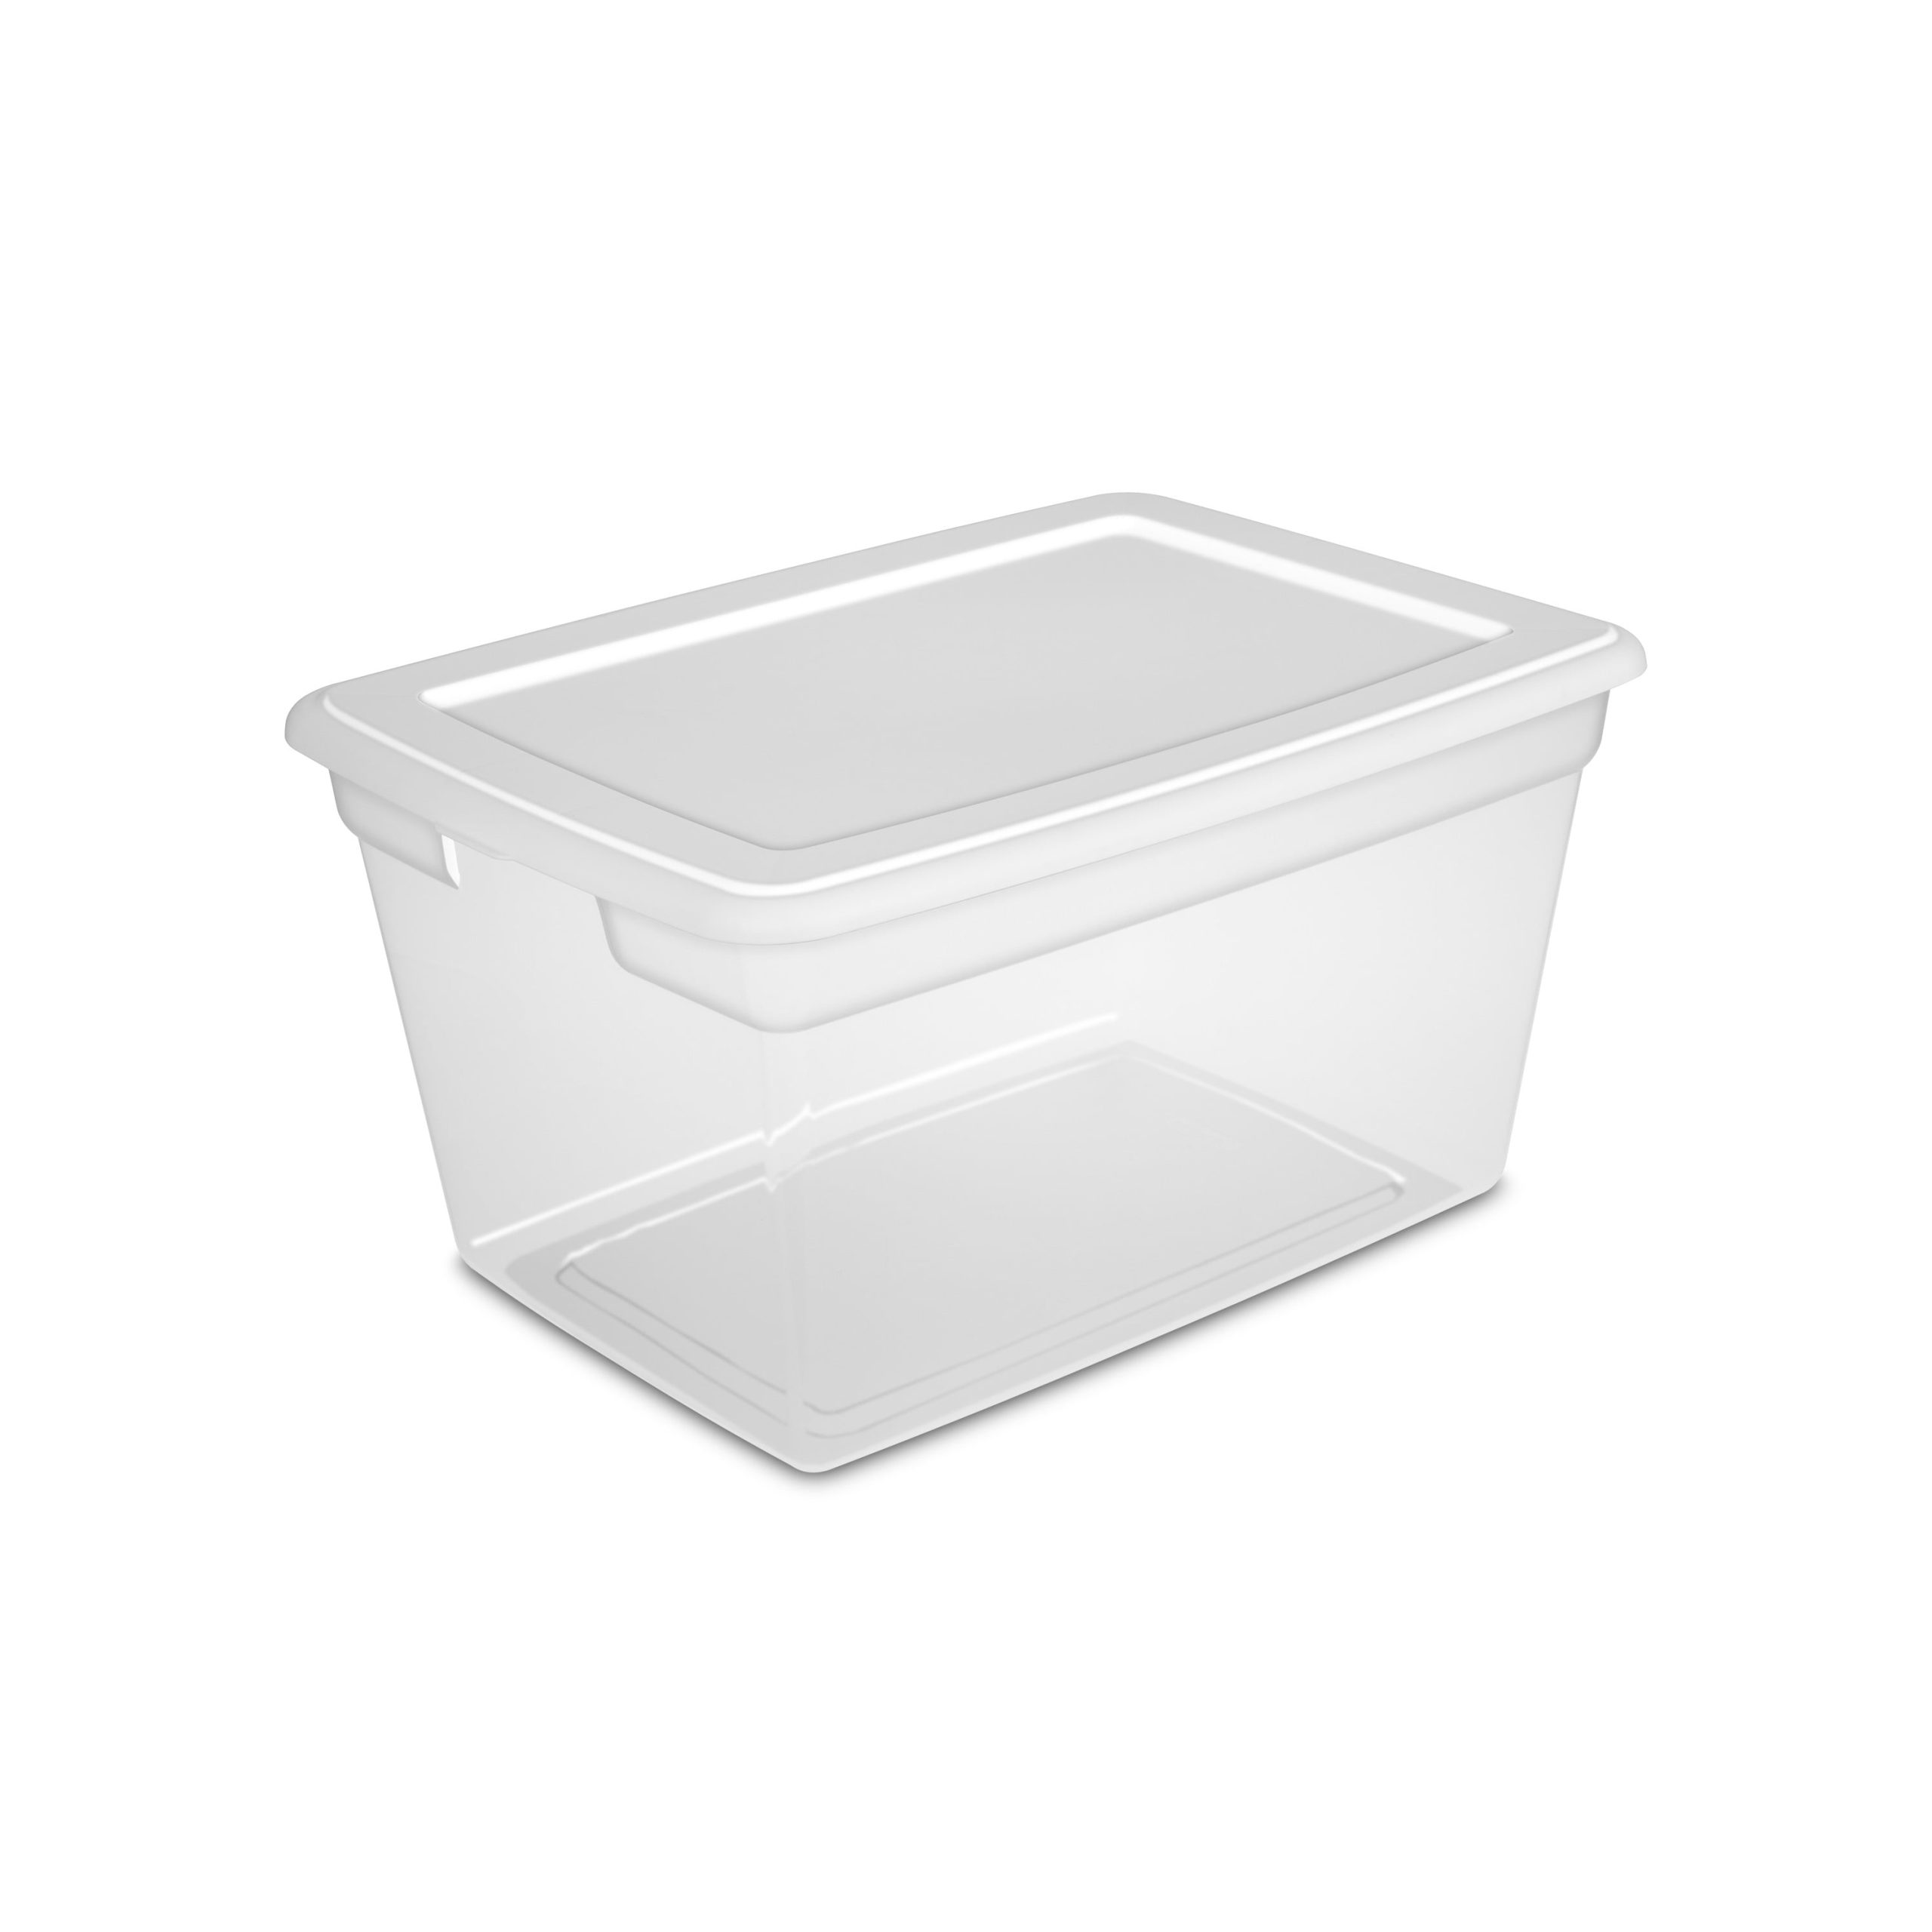 Storage box with lid: Choosing the Perfect for Your Needs